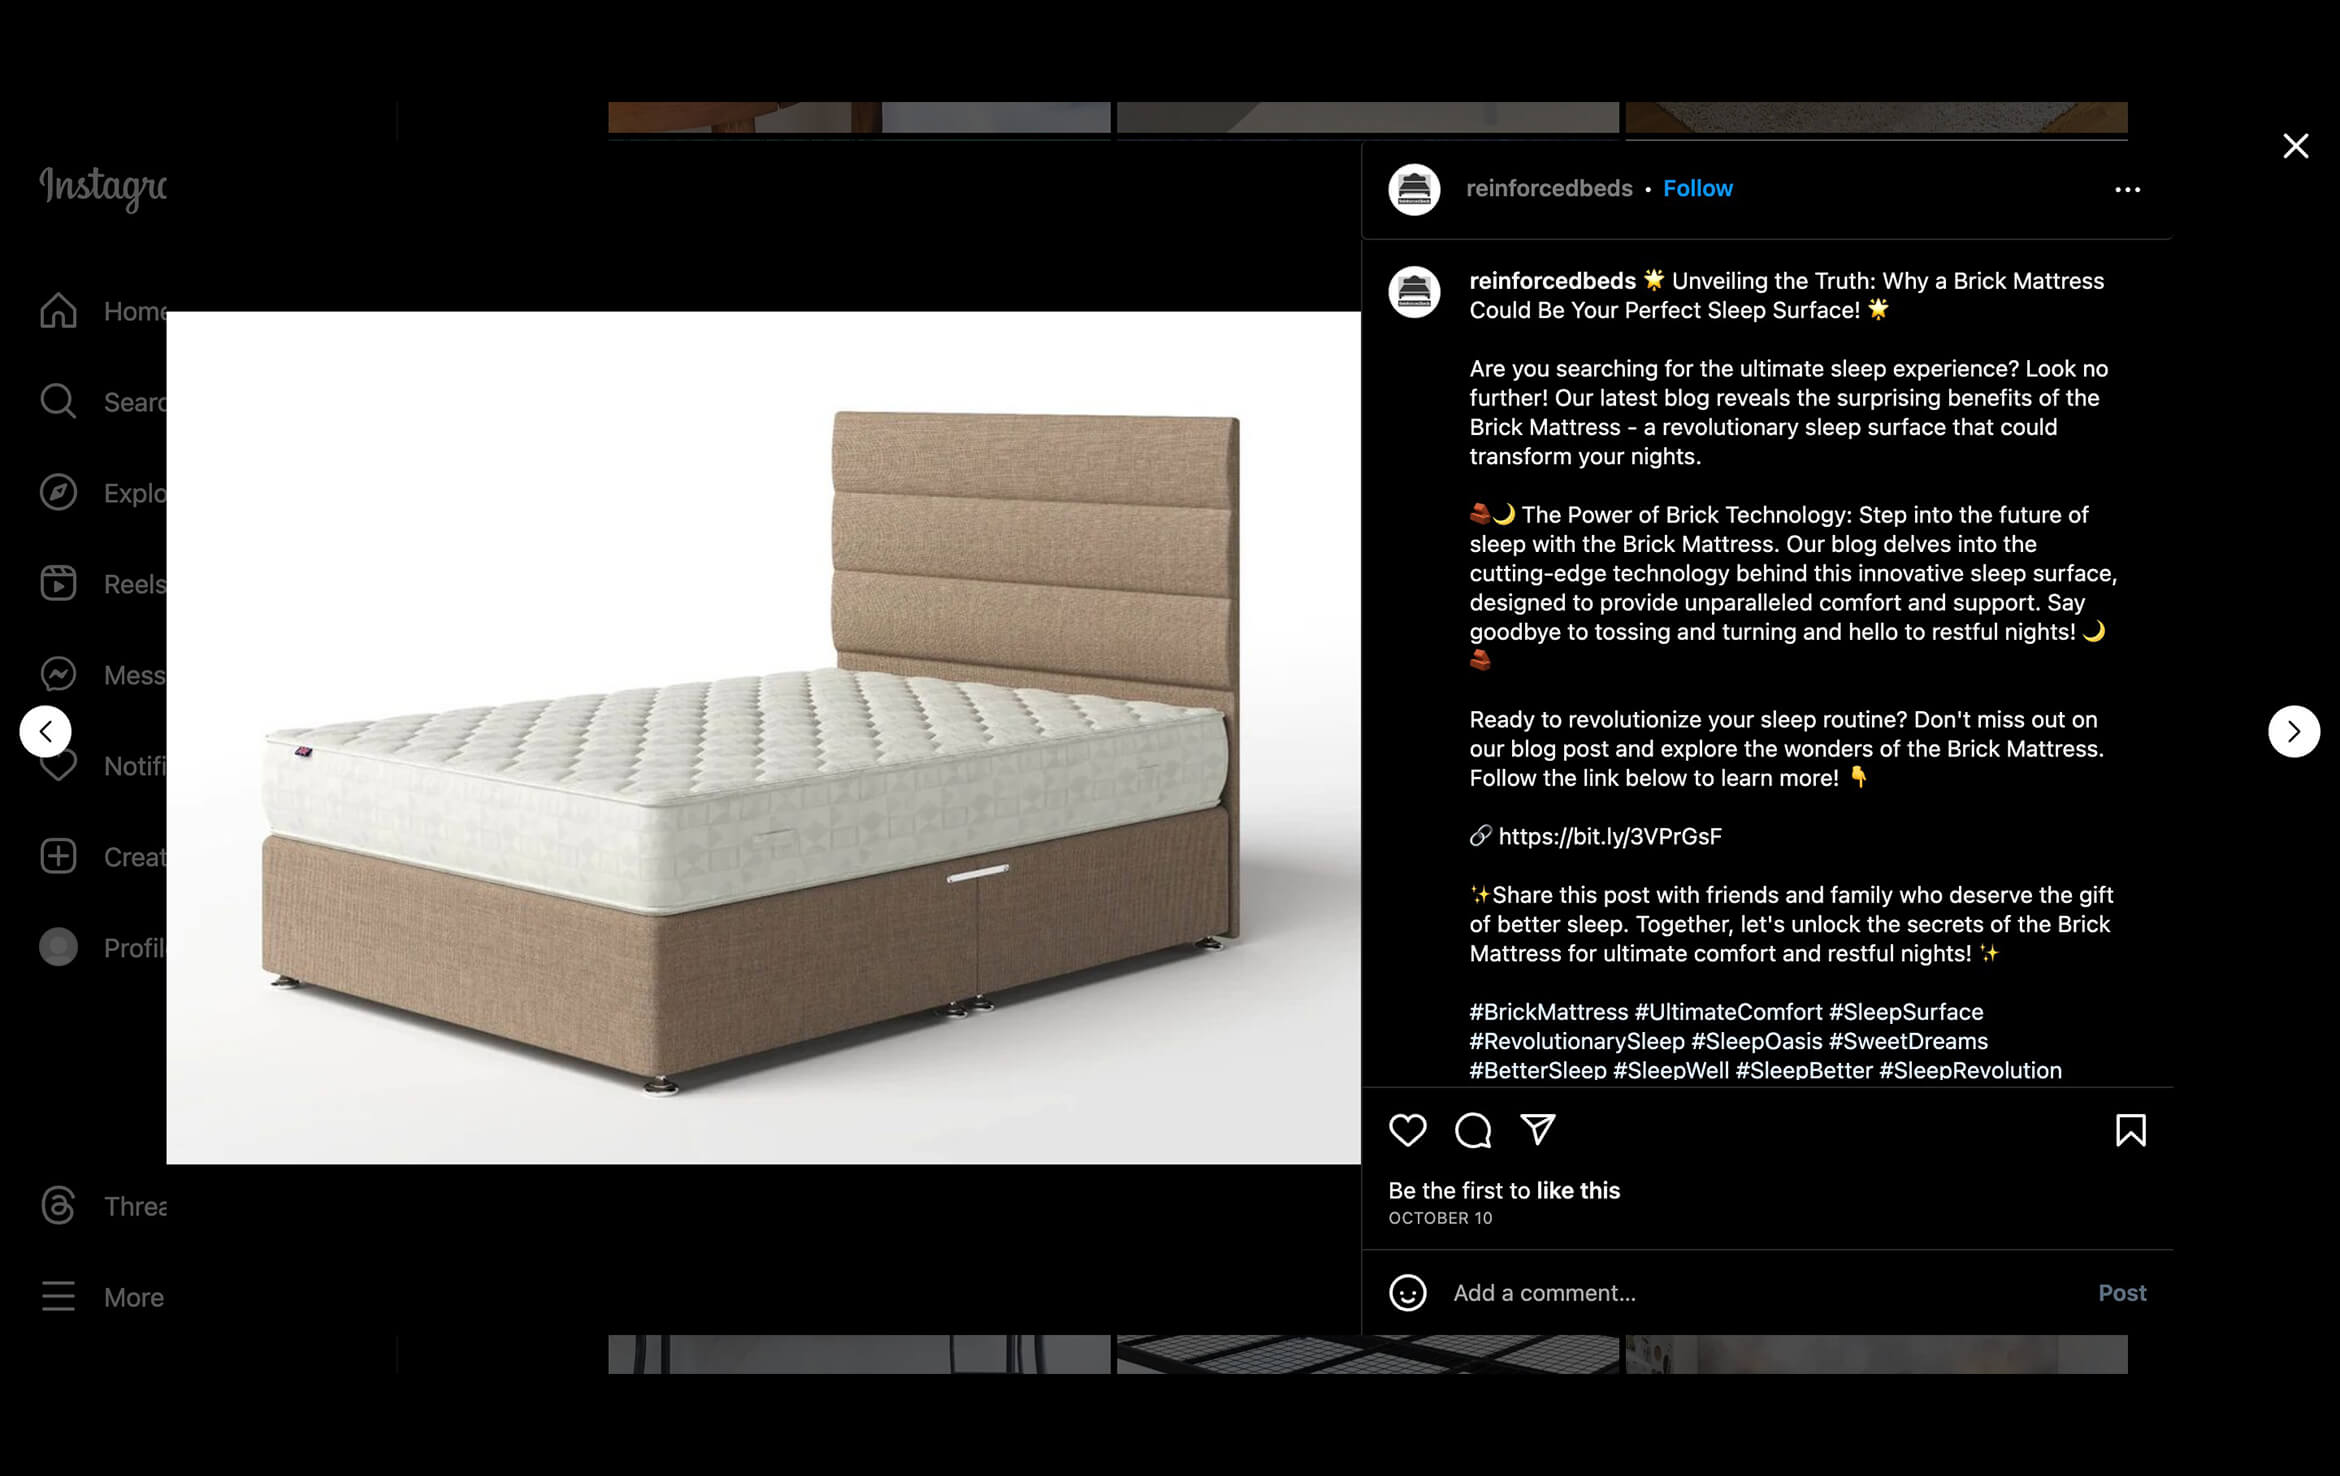 Product Rendering for Reinforced Beds Instagram Page